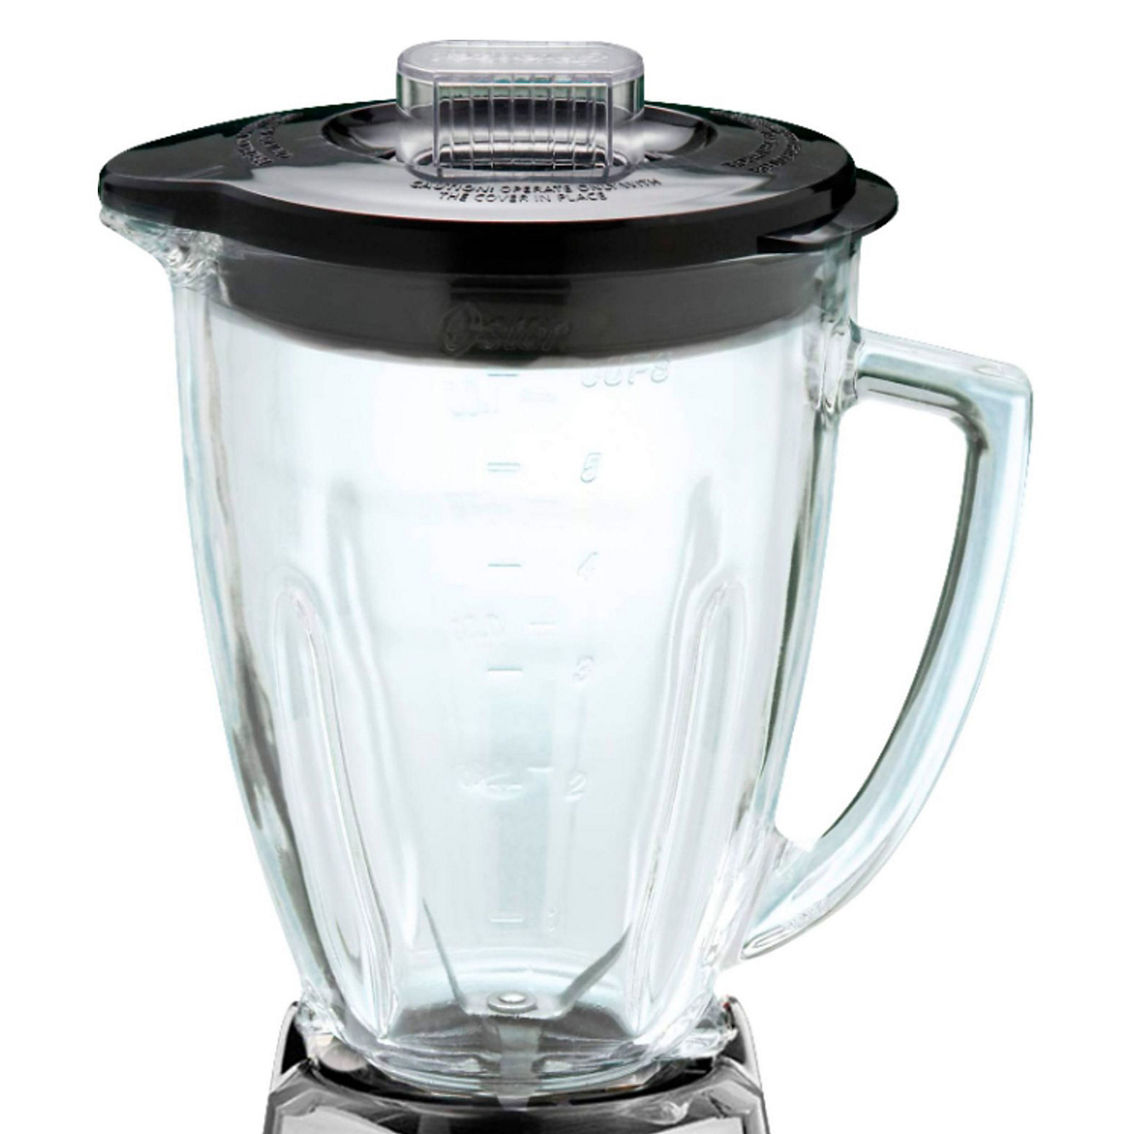 Oster Pro 500 900 Watt 7 Speed Blender in Chrome with 6 Cup Glass Jar - Image 2 of 4